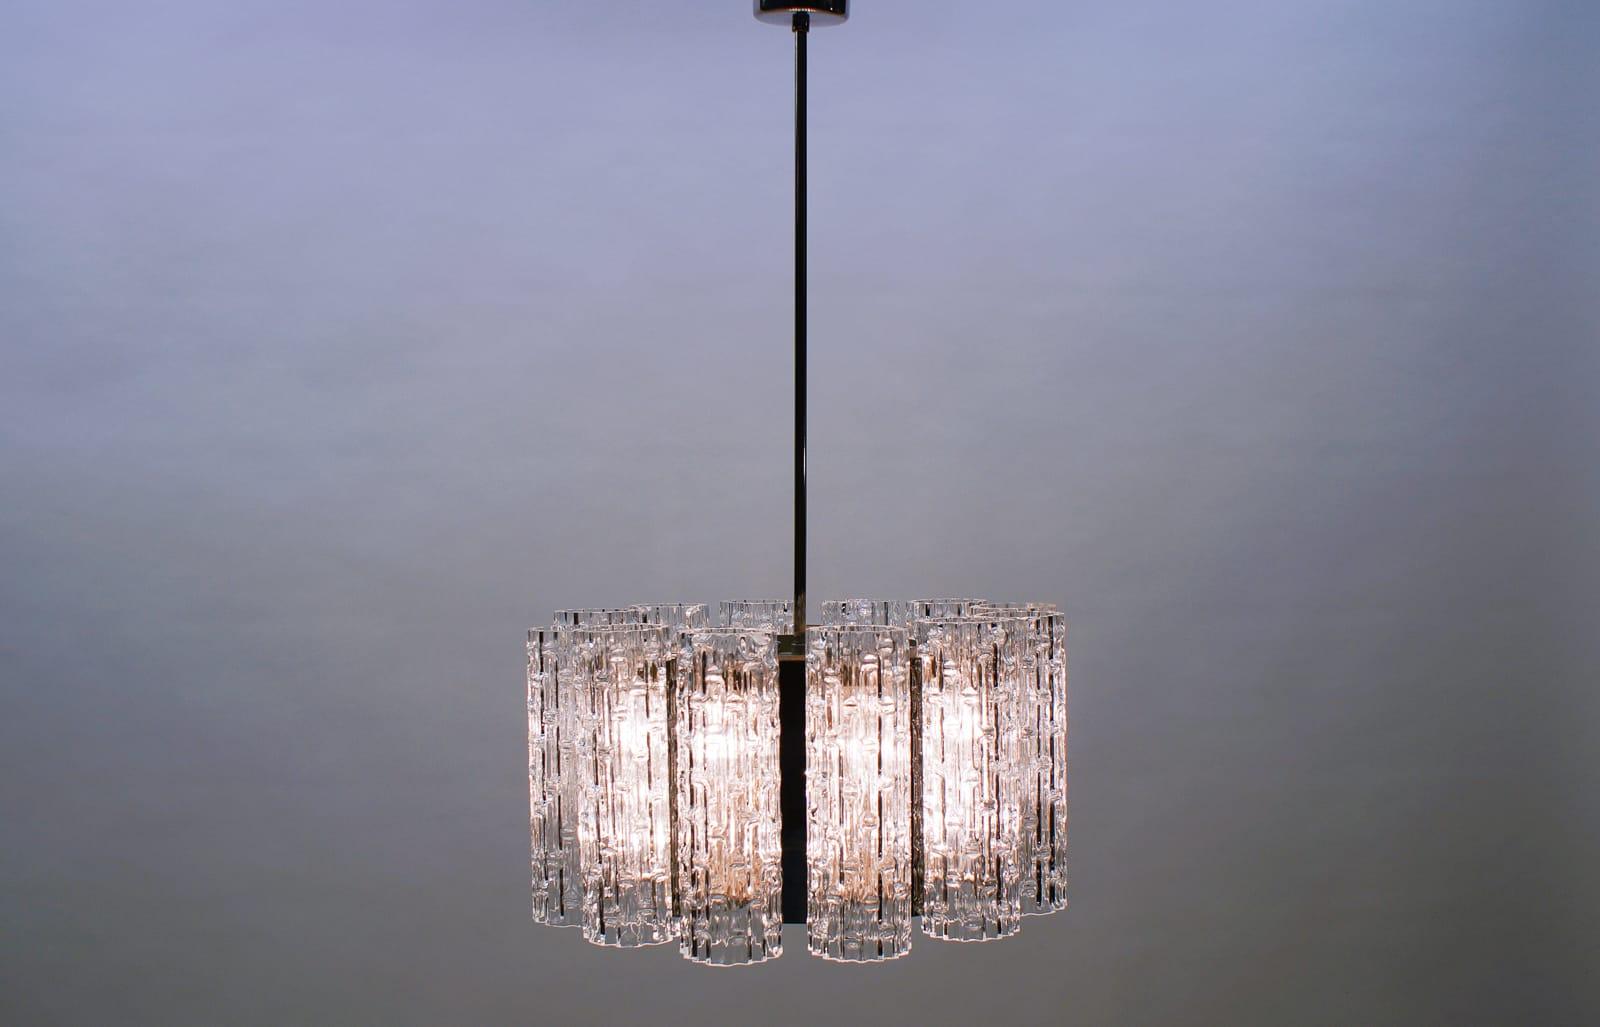 Mid-Century Modern Ceiling Lamp with 12 Textured Glass Shades, Kaiser Leuchten Germany, 1960s For Sale